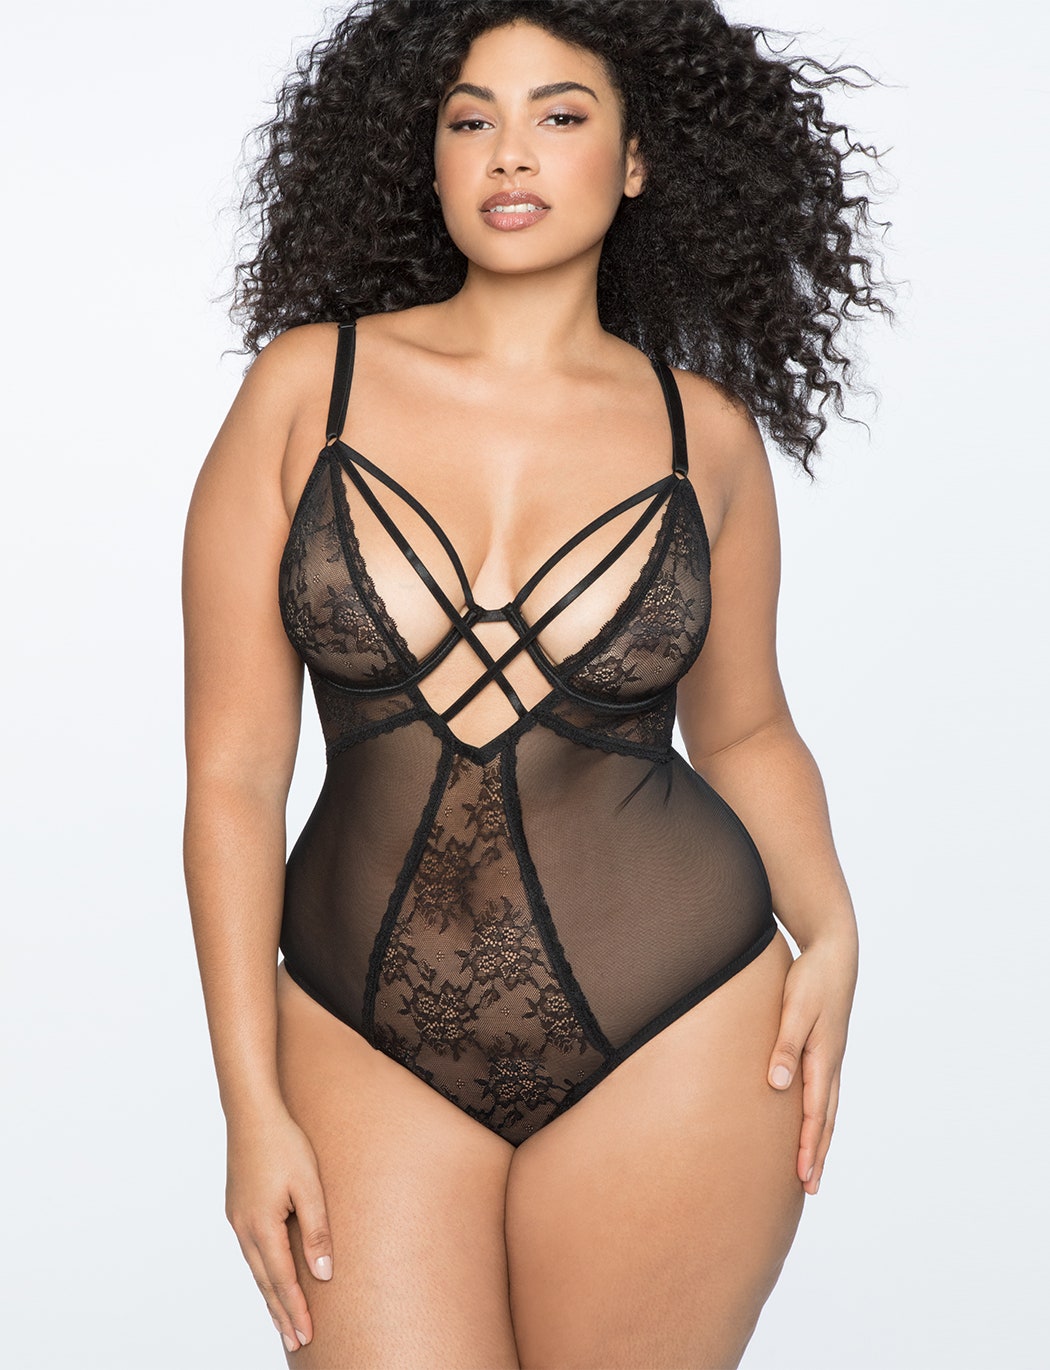 Lingerie for fat people